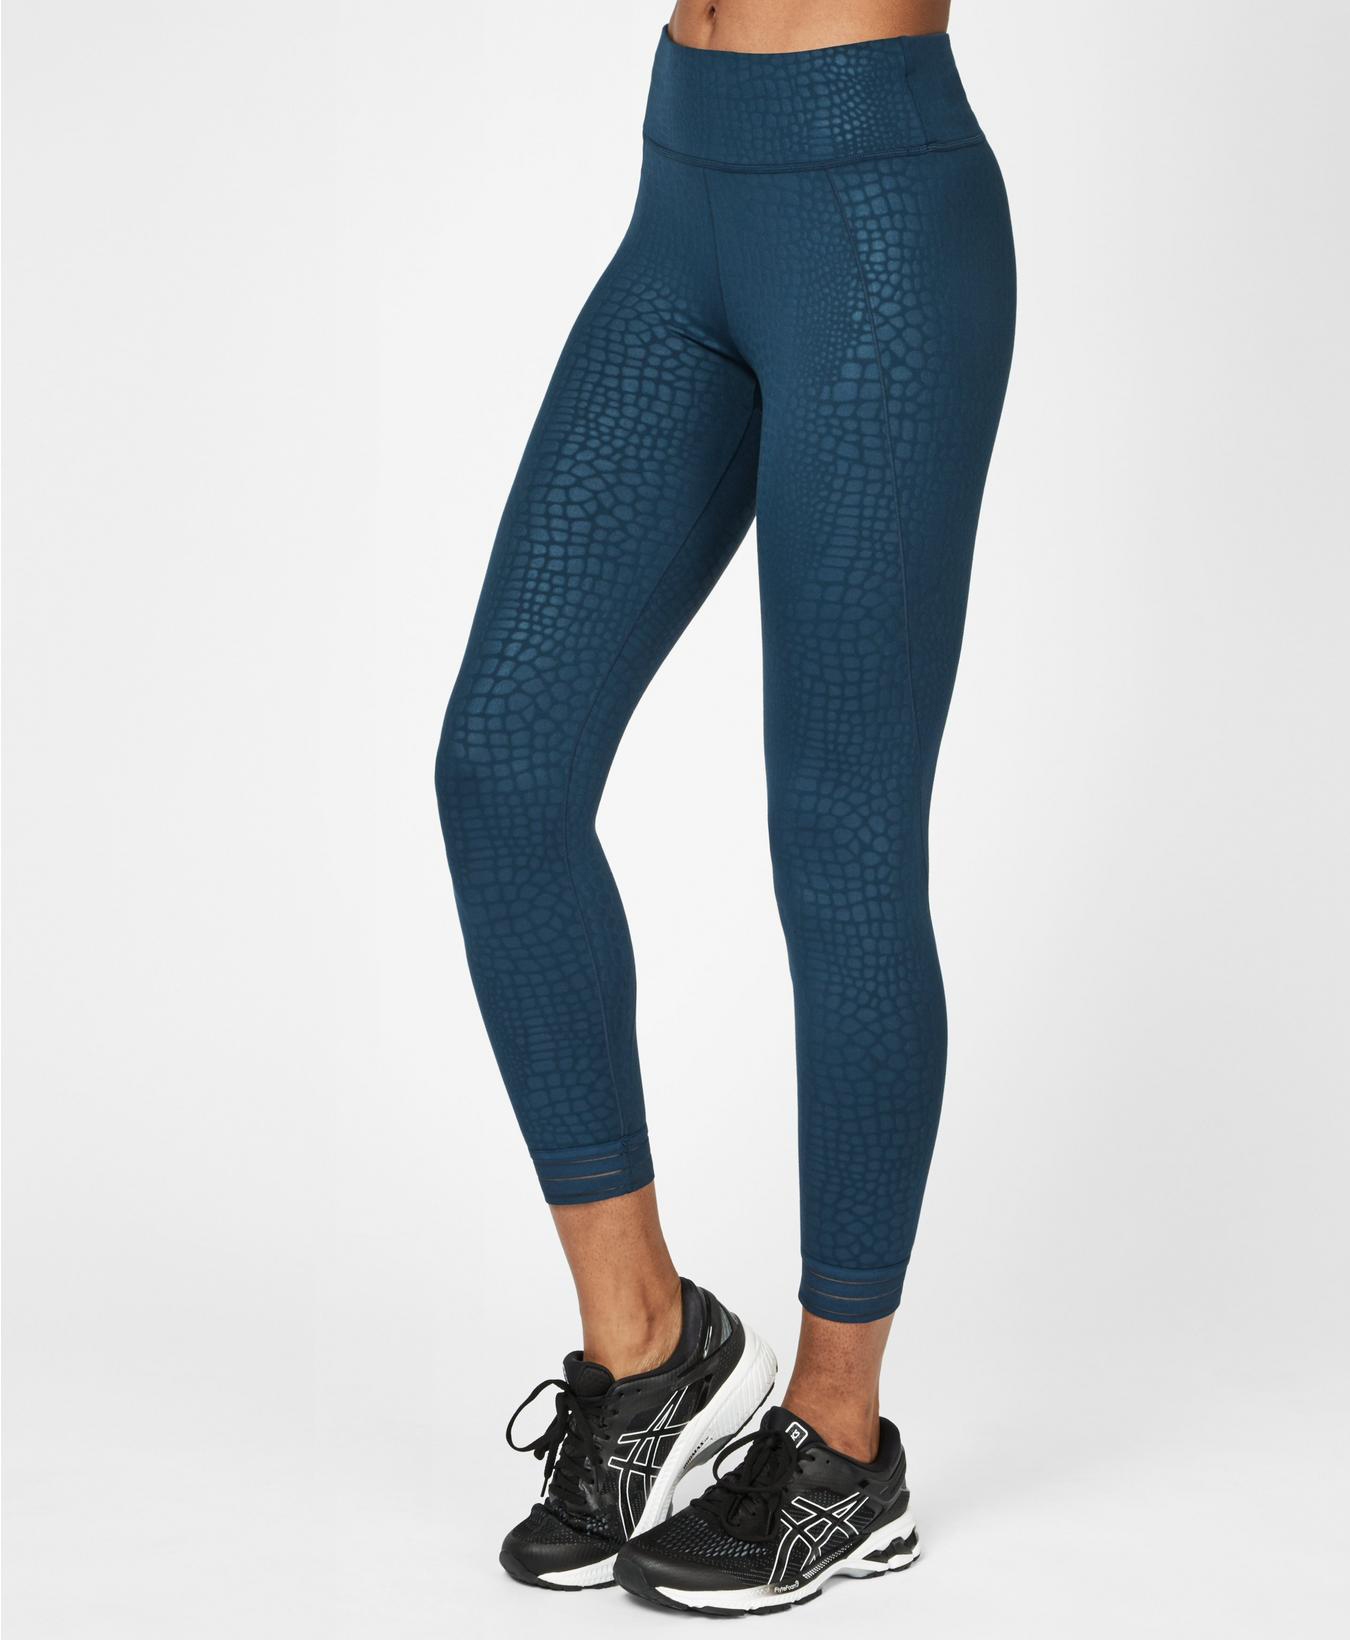 The Best New Workout Leggings From Sweaty Betty | TheThirty